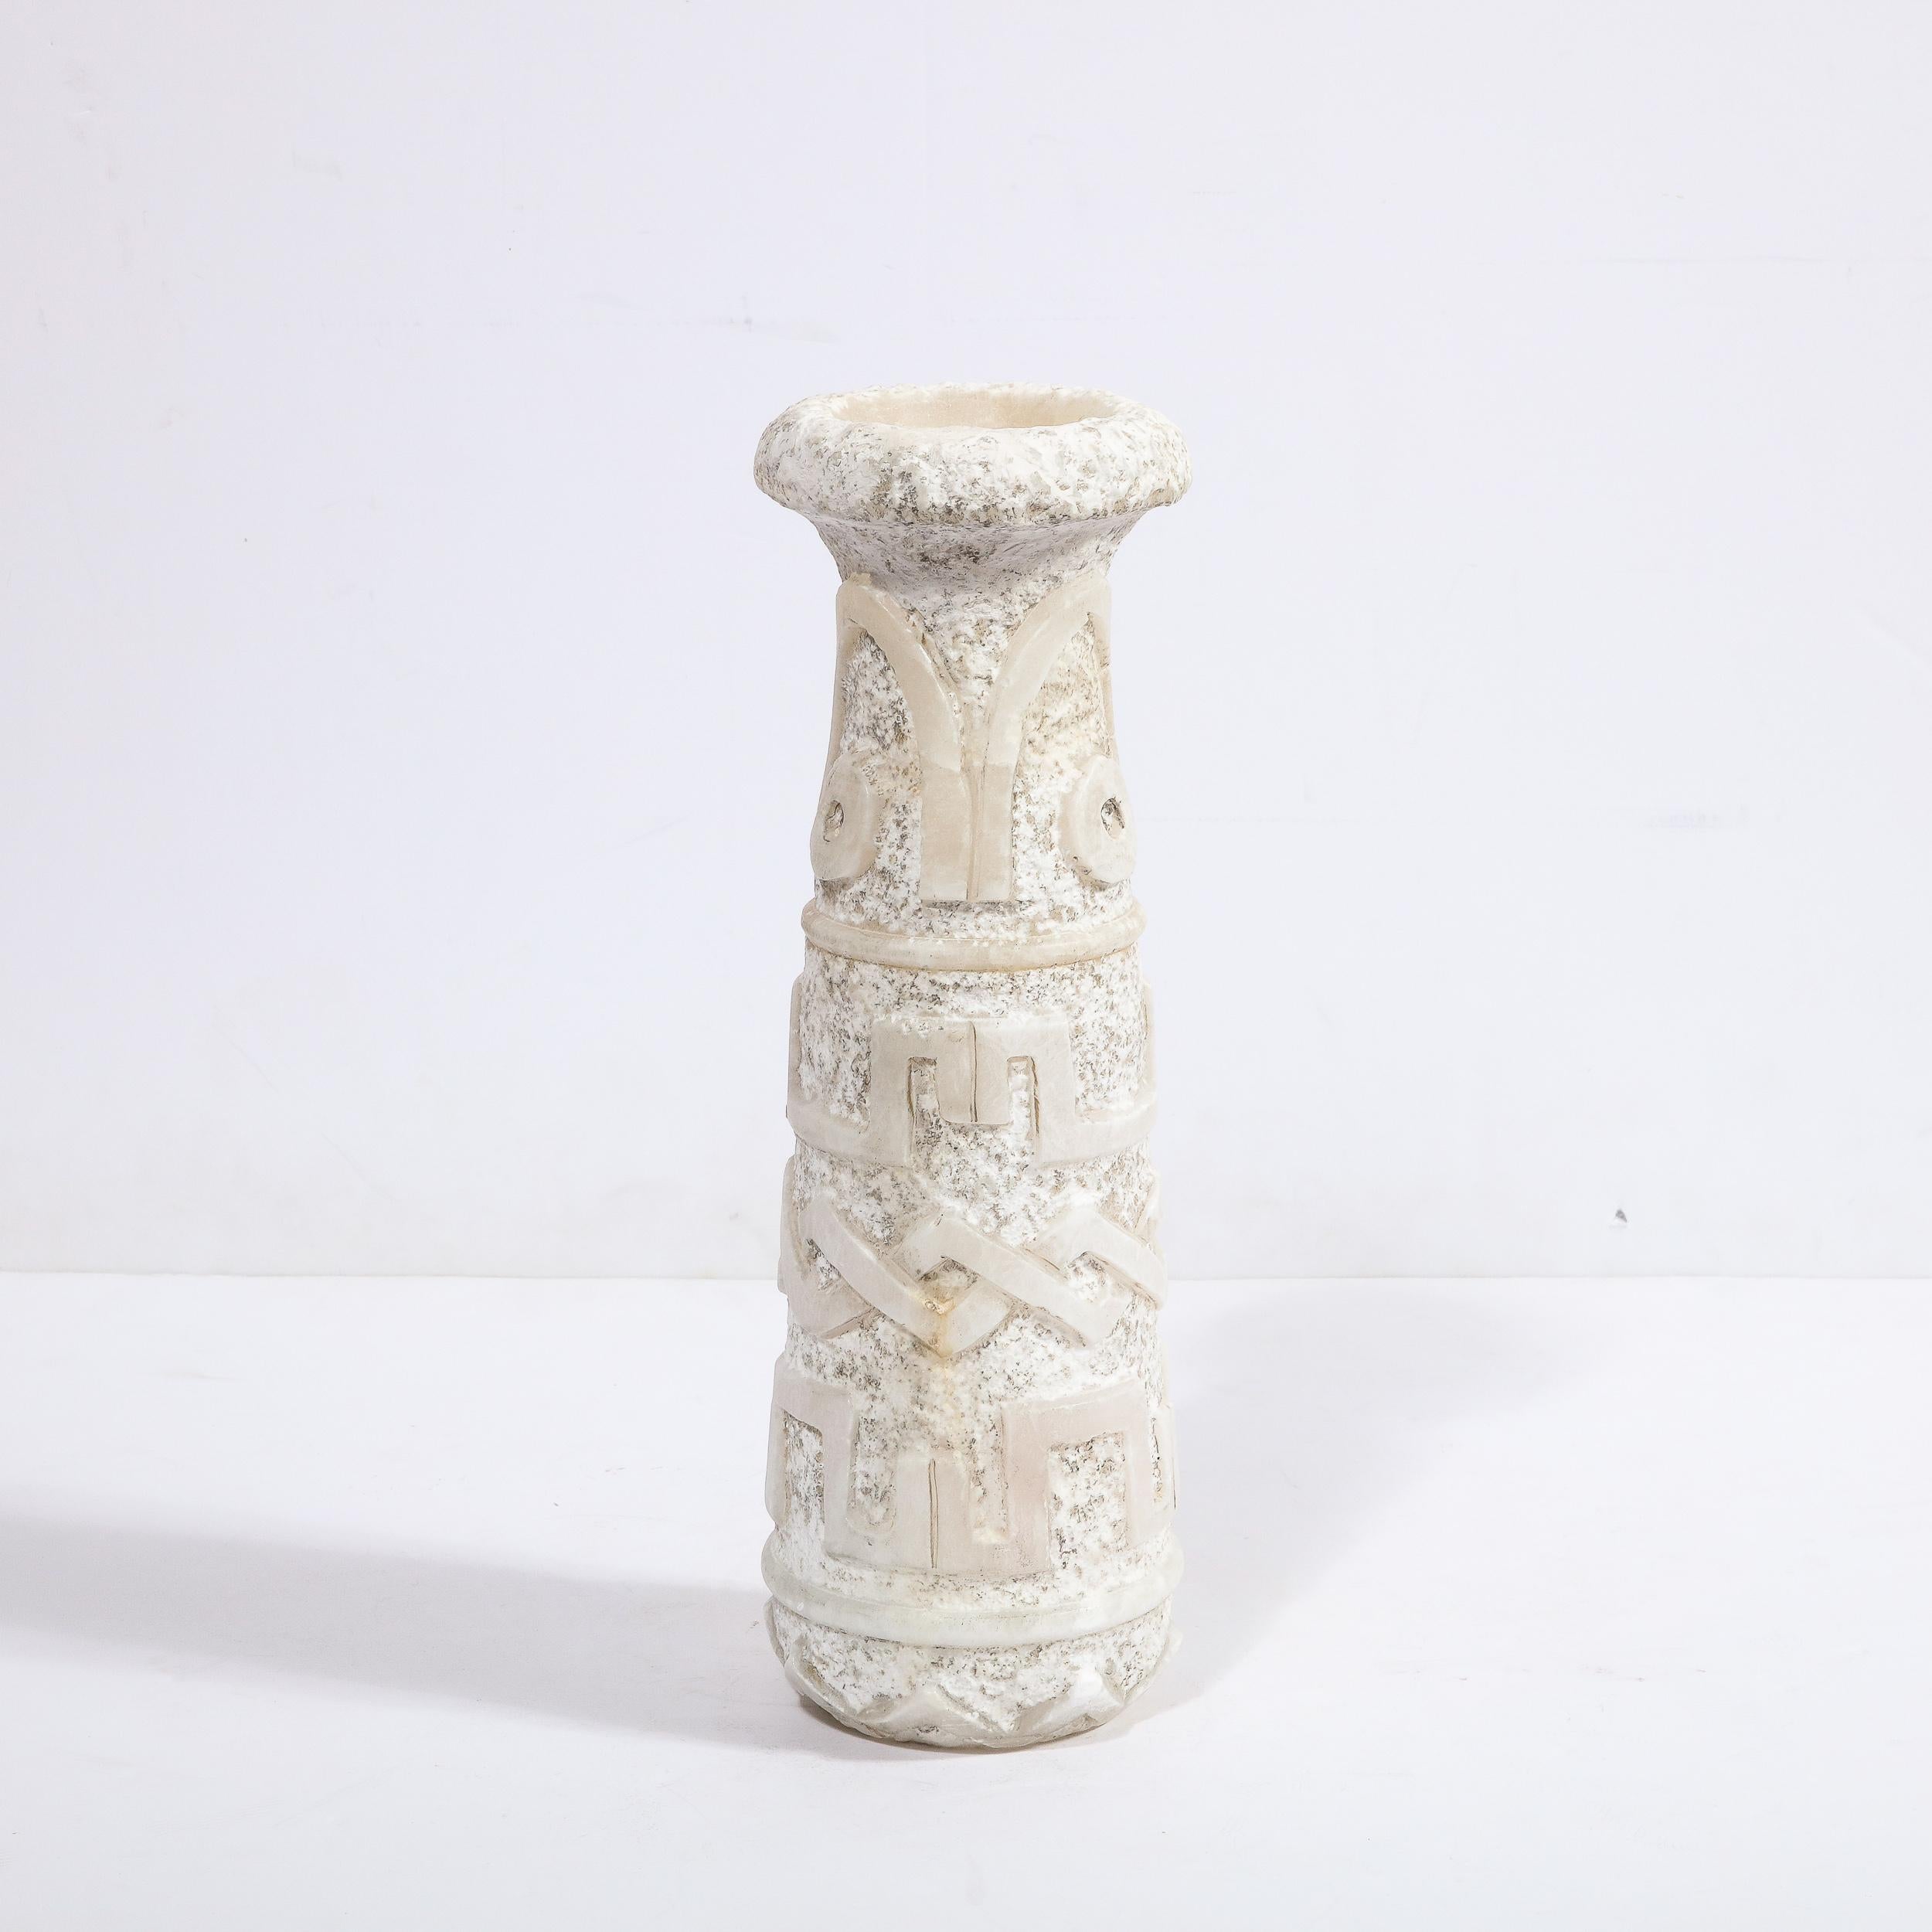 This sophisticated Mid Century Modern primitivist vase was realized in France circa 1950. It features a cylindrical body that tapers towards the top with a flared mouth that cantilevers over the body of the piece- in a beautiful white exotic marble.